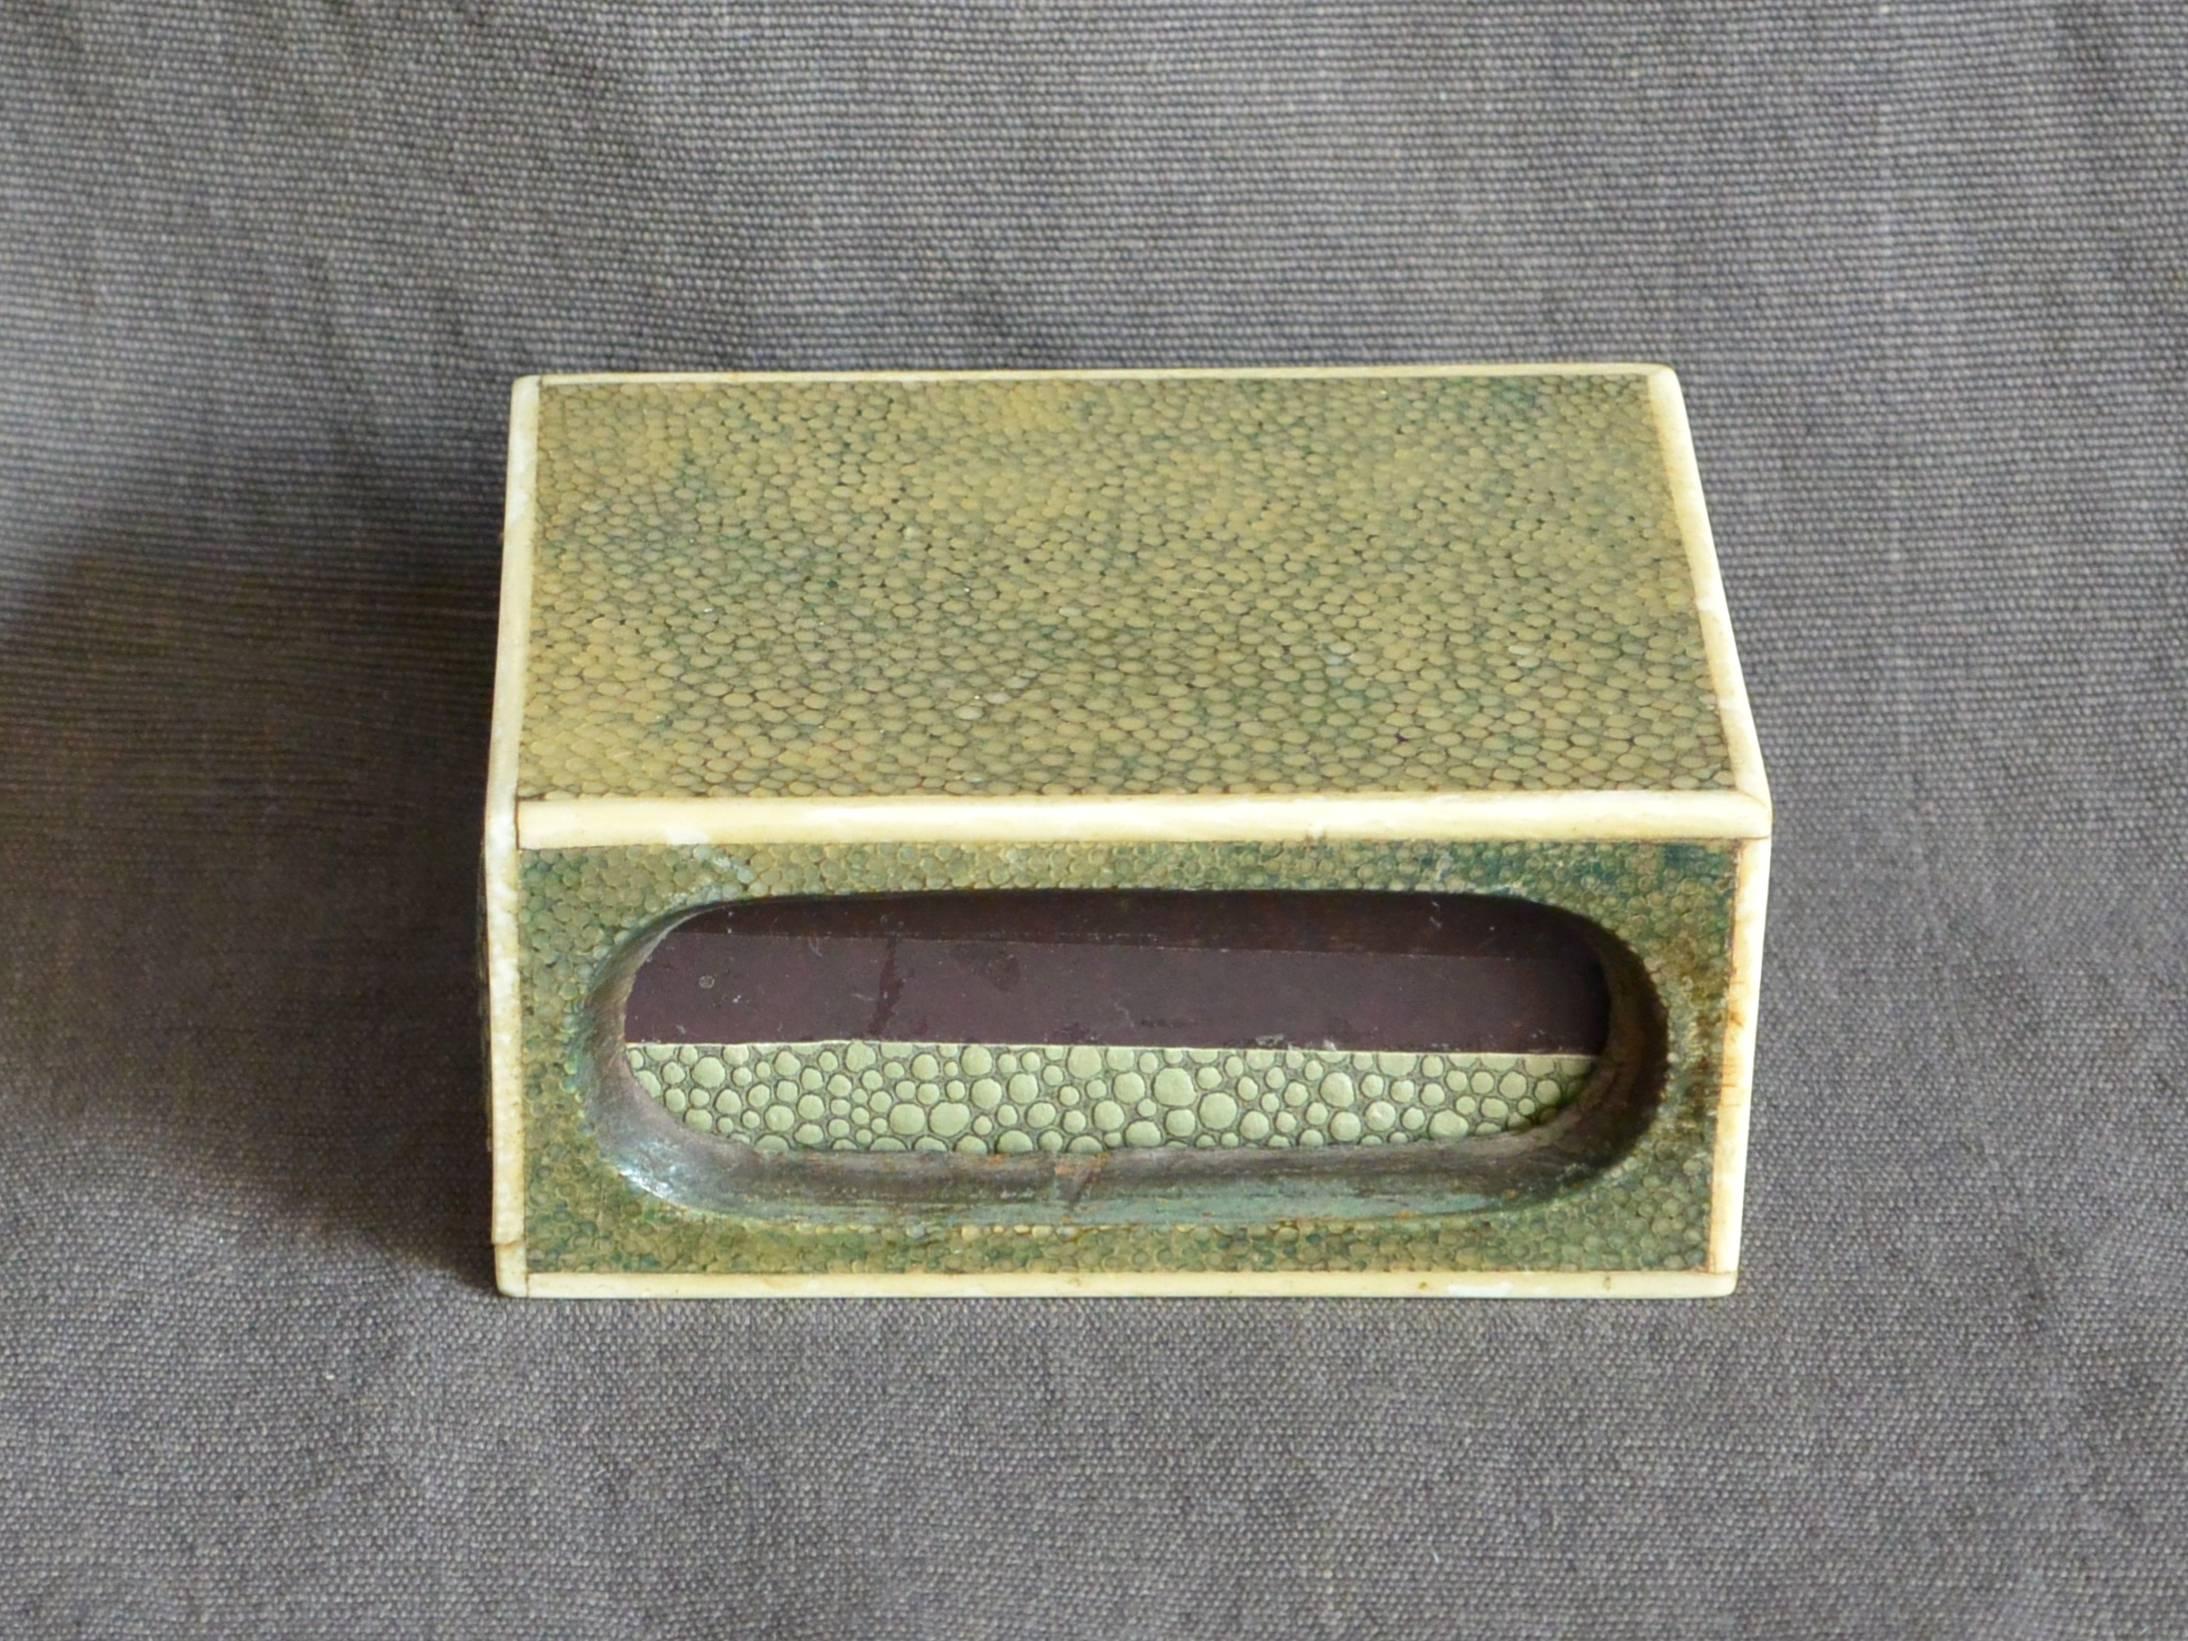 Shagreen match box . Bone trimmed celadon galuchat match box with three strike voids and paper covered match cartridge; a chic little stingray matchbox.  England, early 20th century. 
Dimension: 3